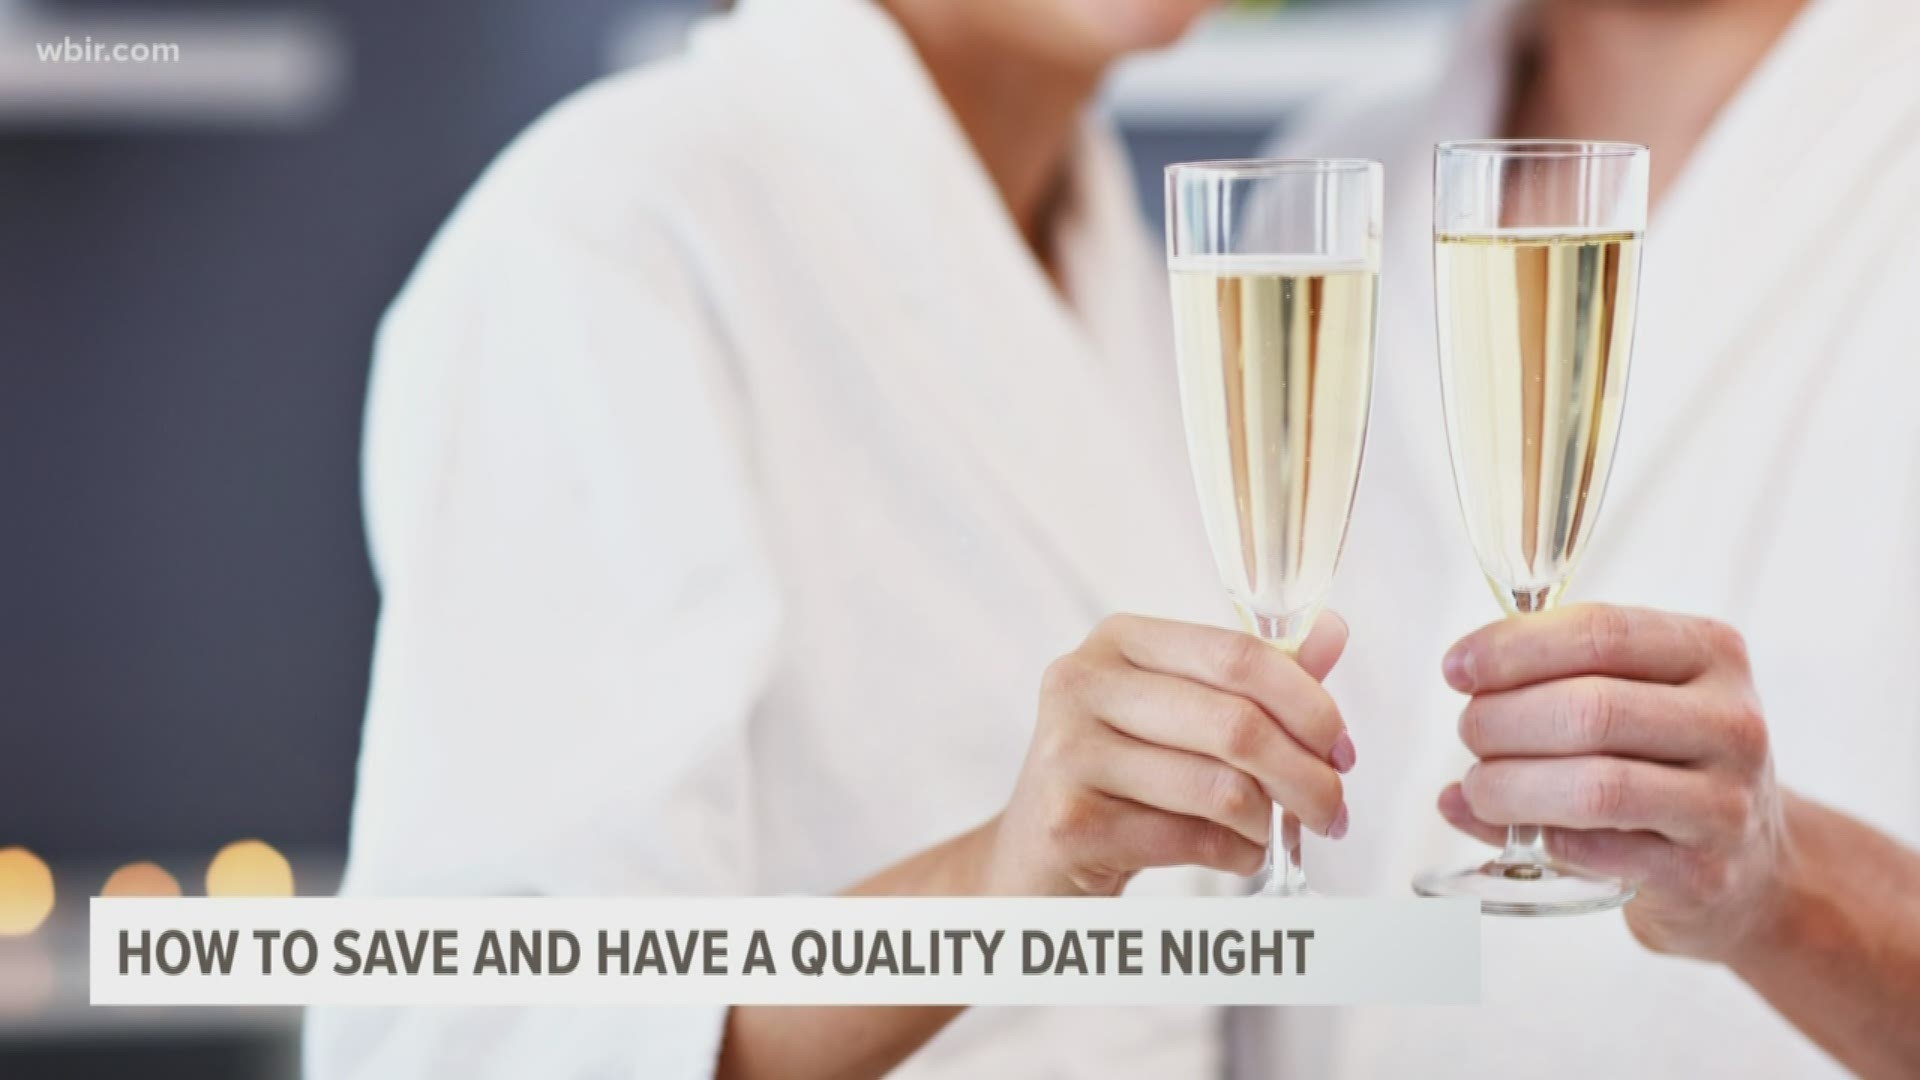 There are tons of ways you can save money and still have a fun and exciting date night. Here's how!